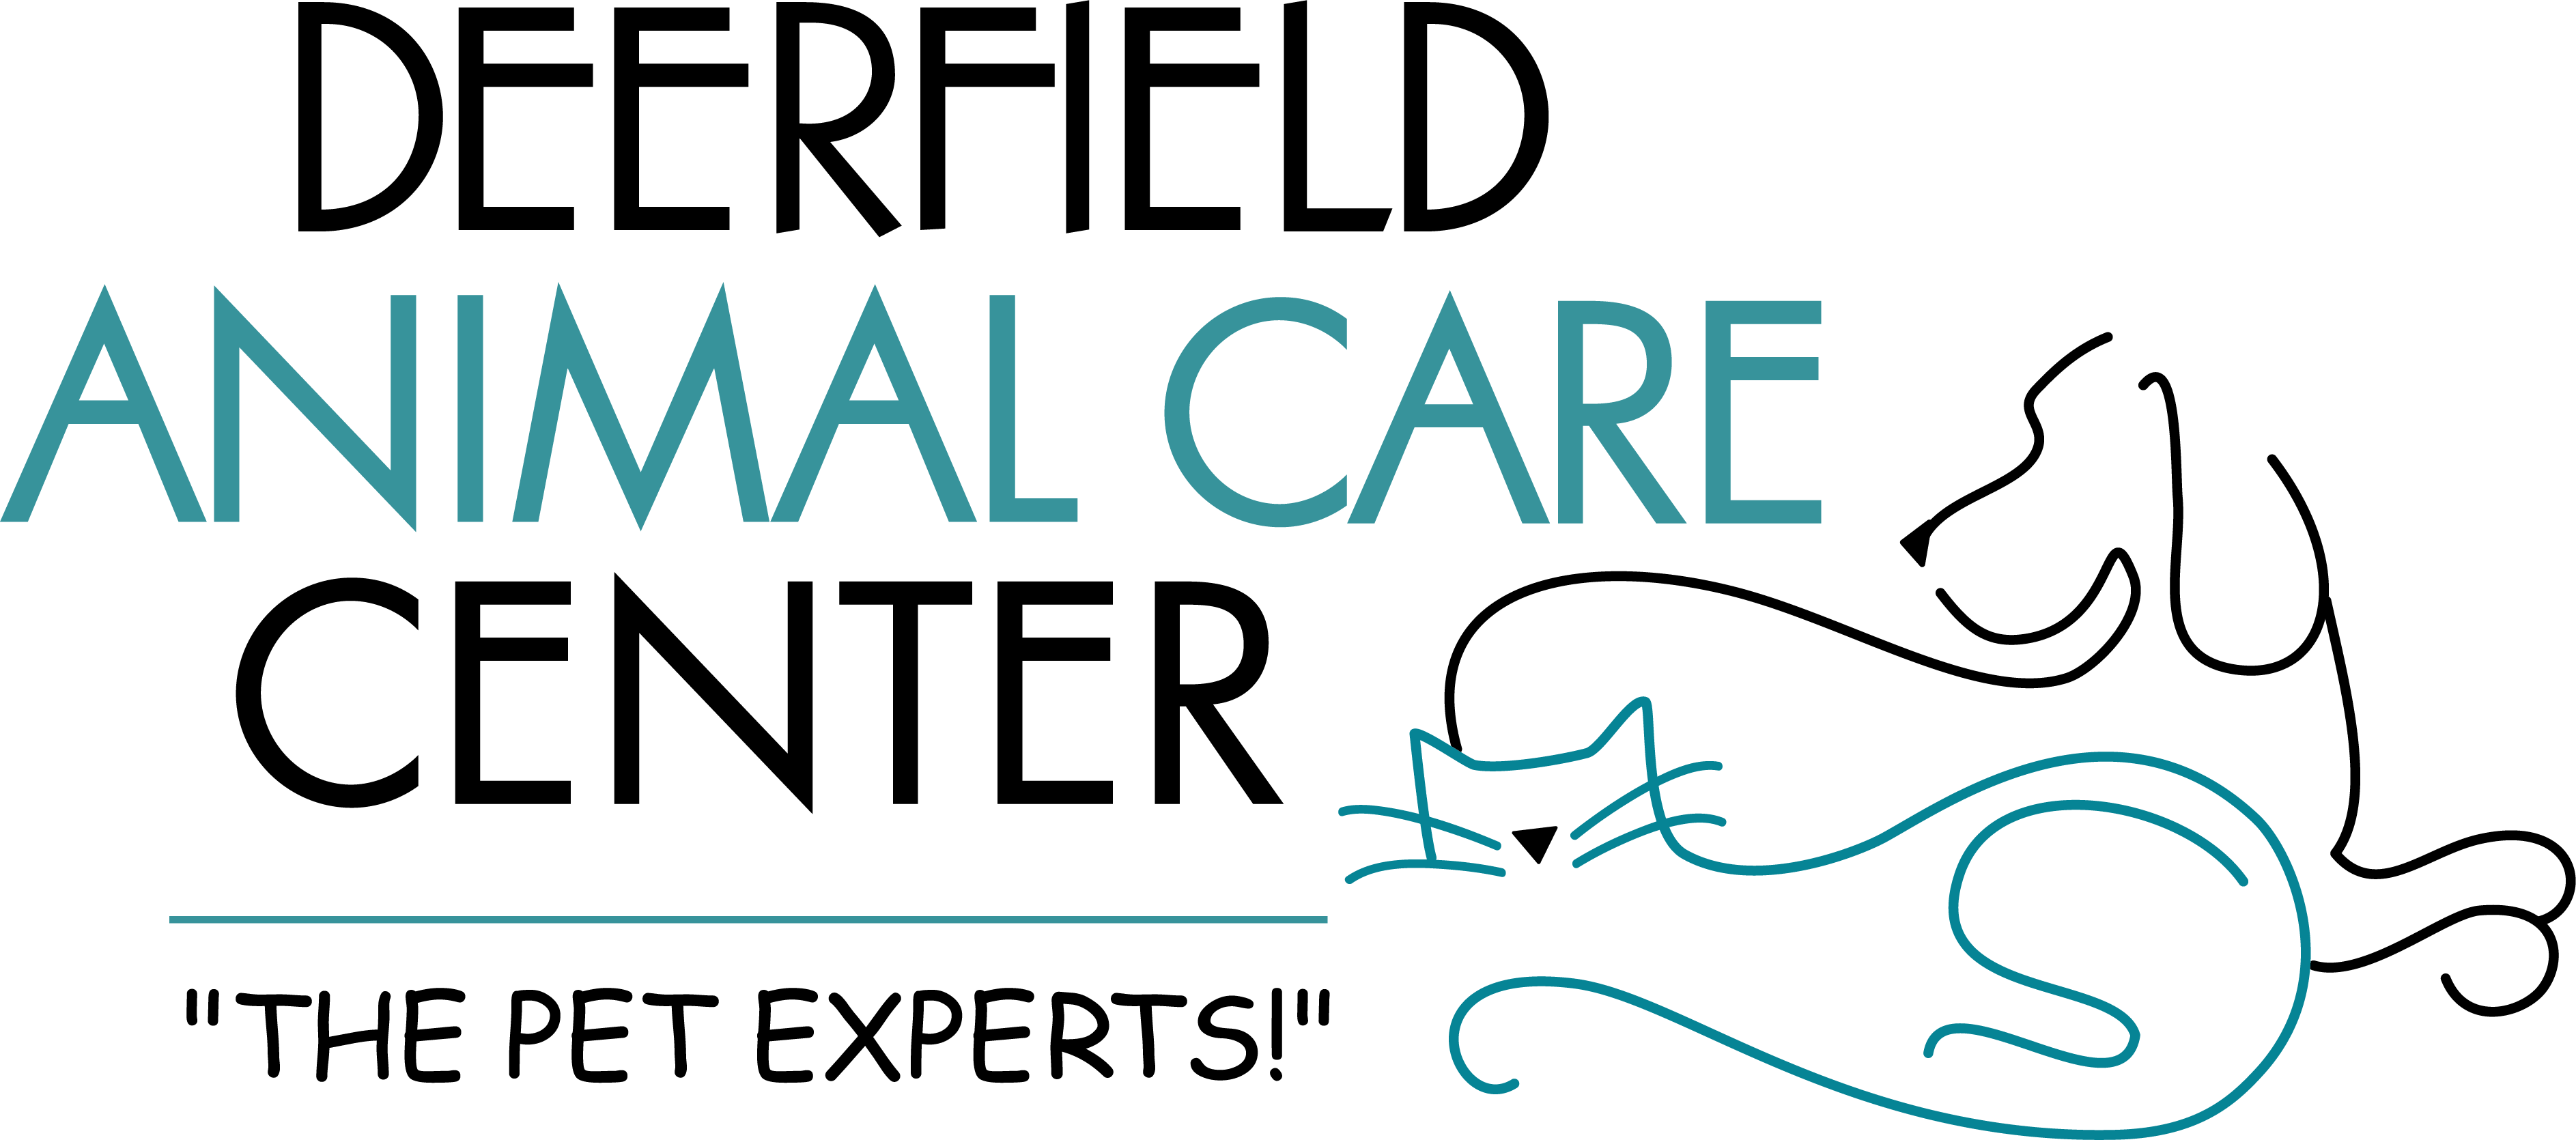 Home Page | Deerfield Animal Care Center